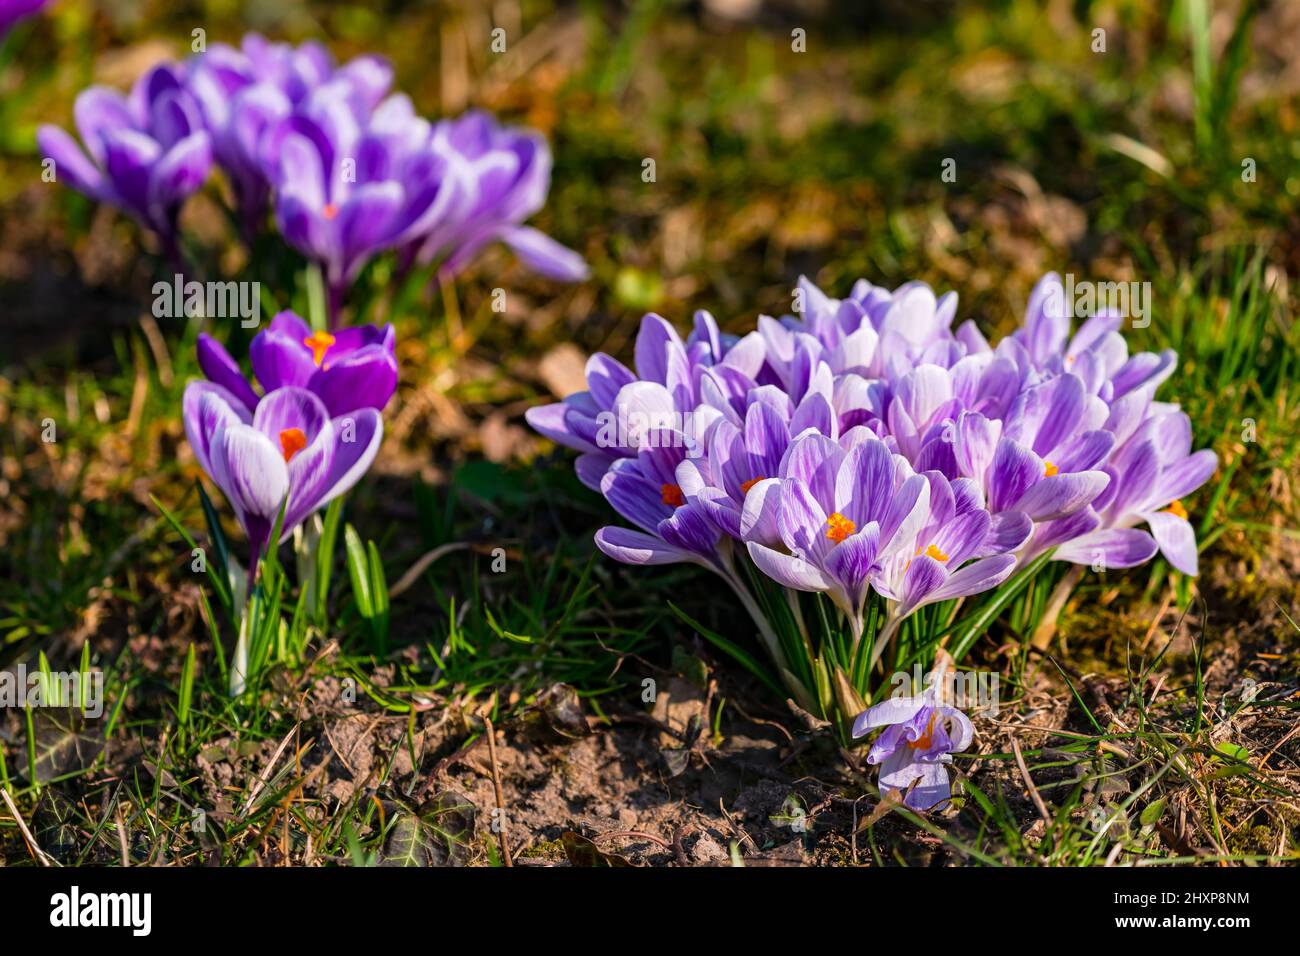 Close-up with selective focus of idyllic purple crocuses in the grass as flowers that herald spring Stock Photo